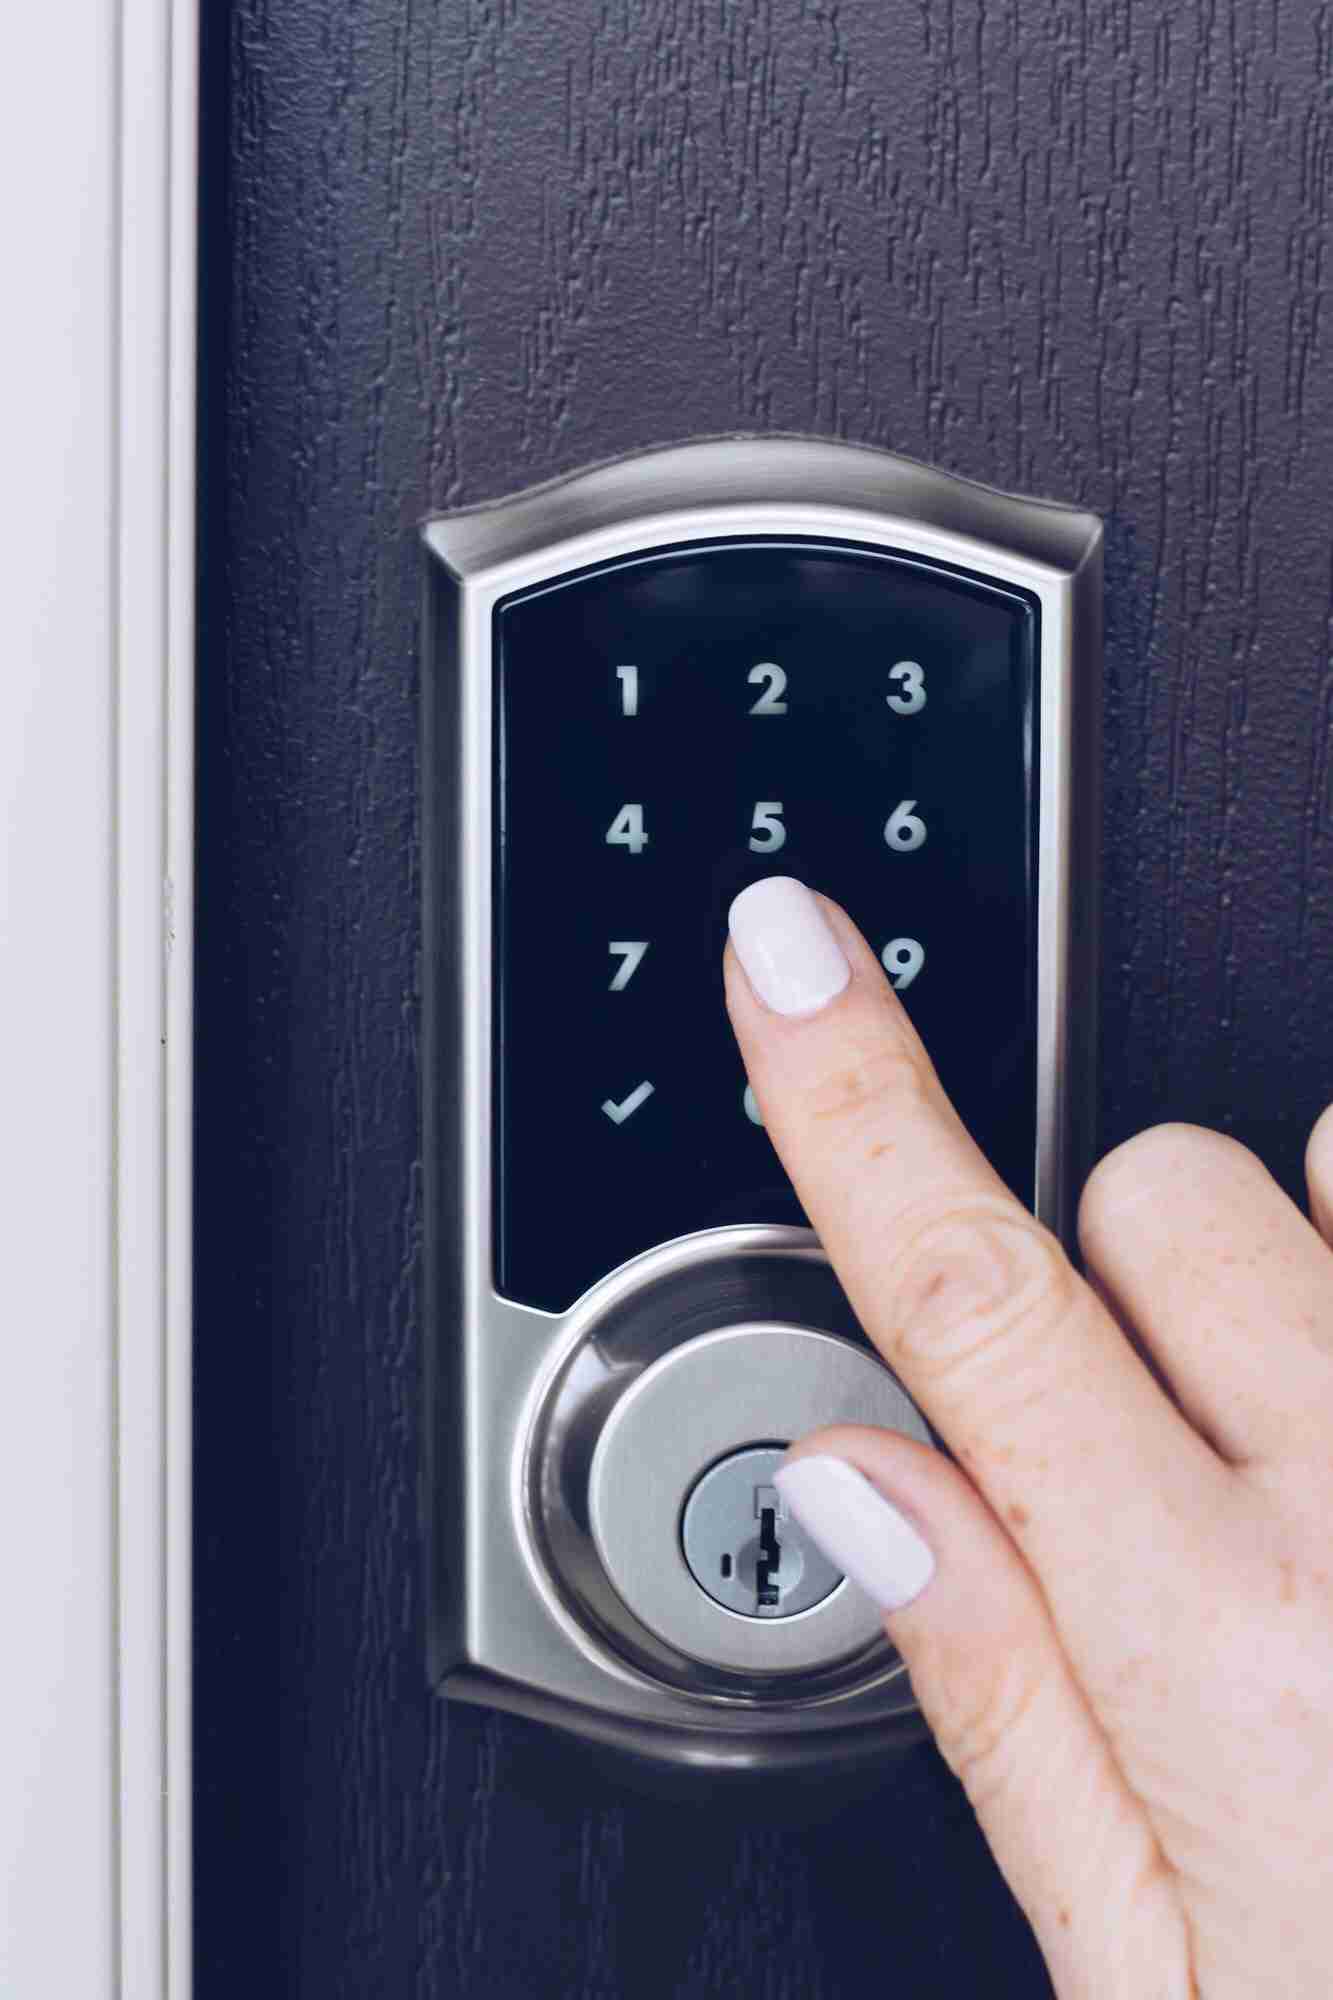 Electronic keypad, residential and commercial locksmith service